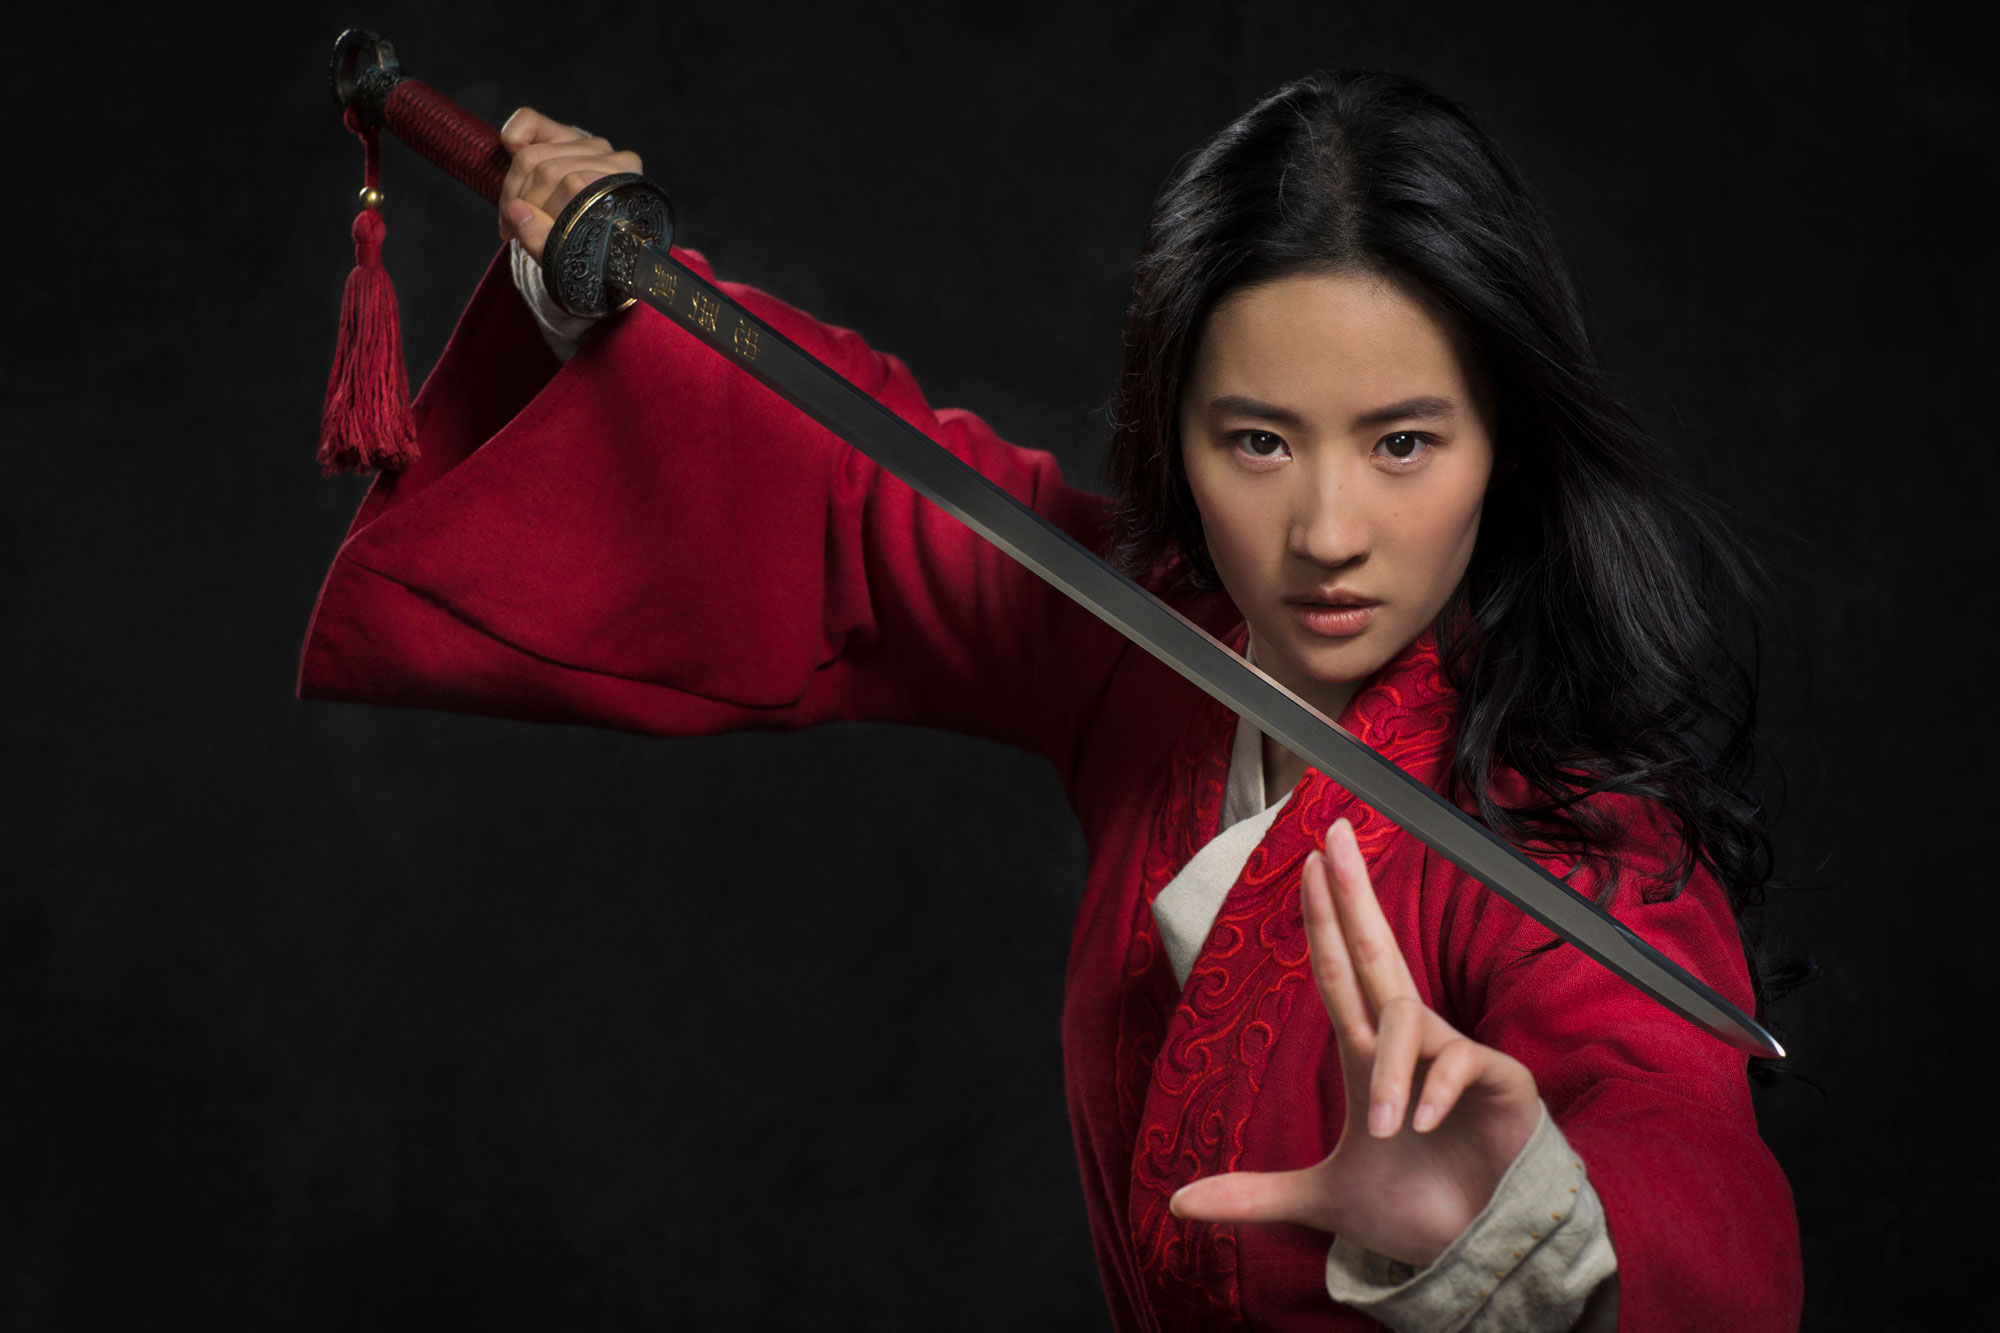 Production Begins on Disney’s New Live-Action Adaptation of Animated Classic Mulan